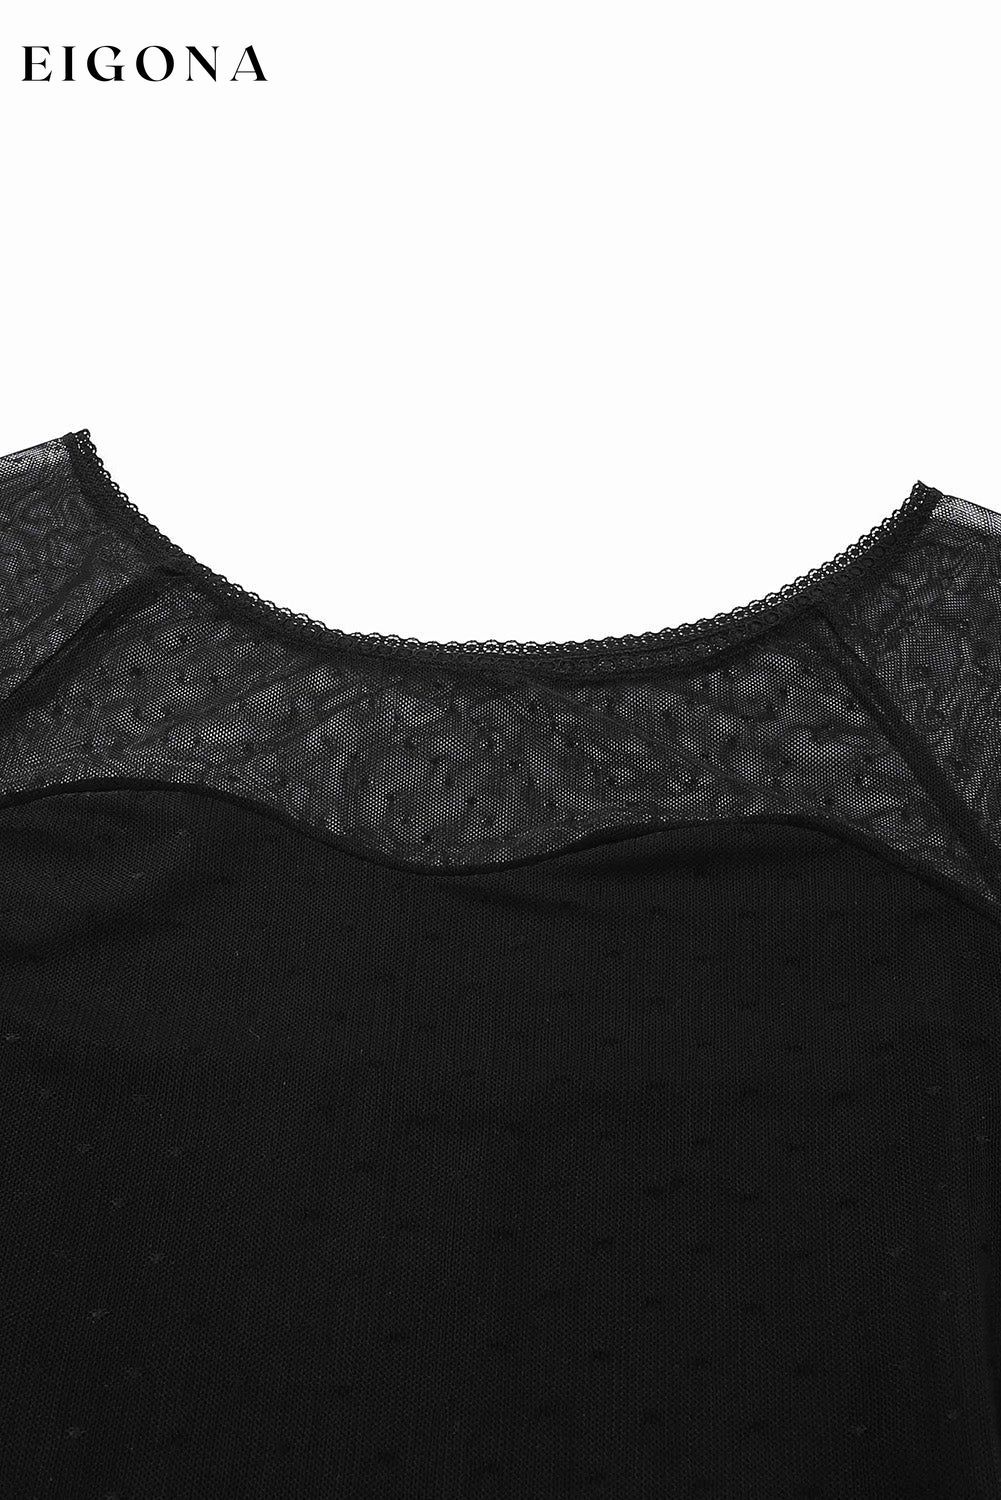 Black Dotty Mesh Overlay Long Sleeve Bodysuit bodysuit bodysuits clothes DL Exclusive Fabric Lace Fabric Sheer Fabric Swiss Dot Occasion Daily Print Solid Color Season Four Seasons Style Elegant trend